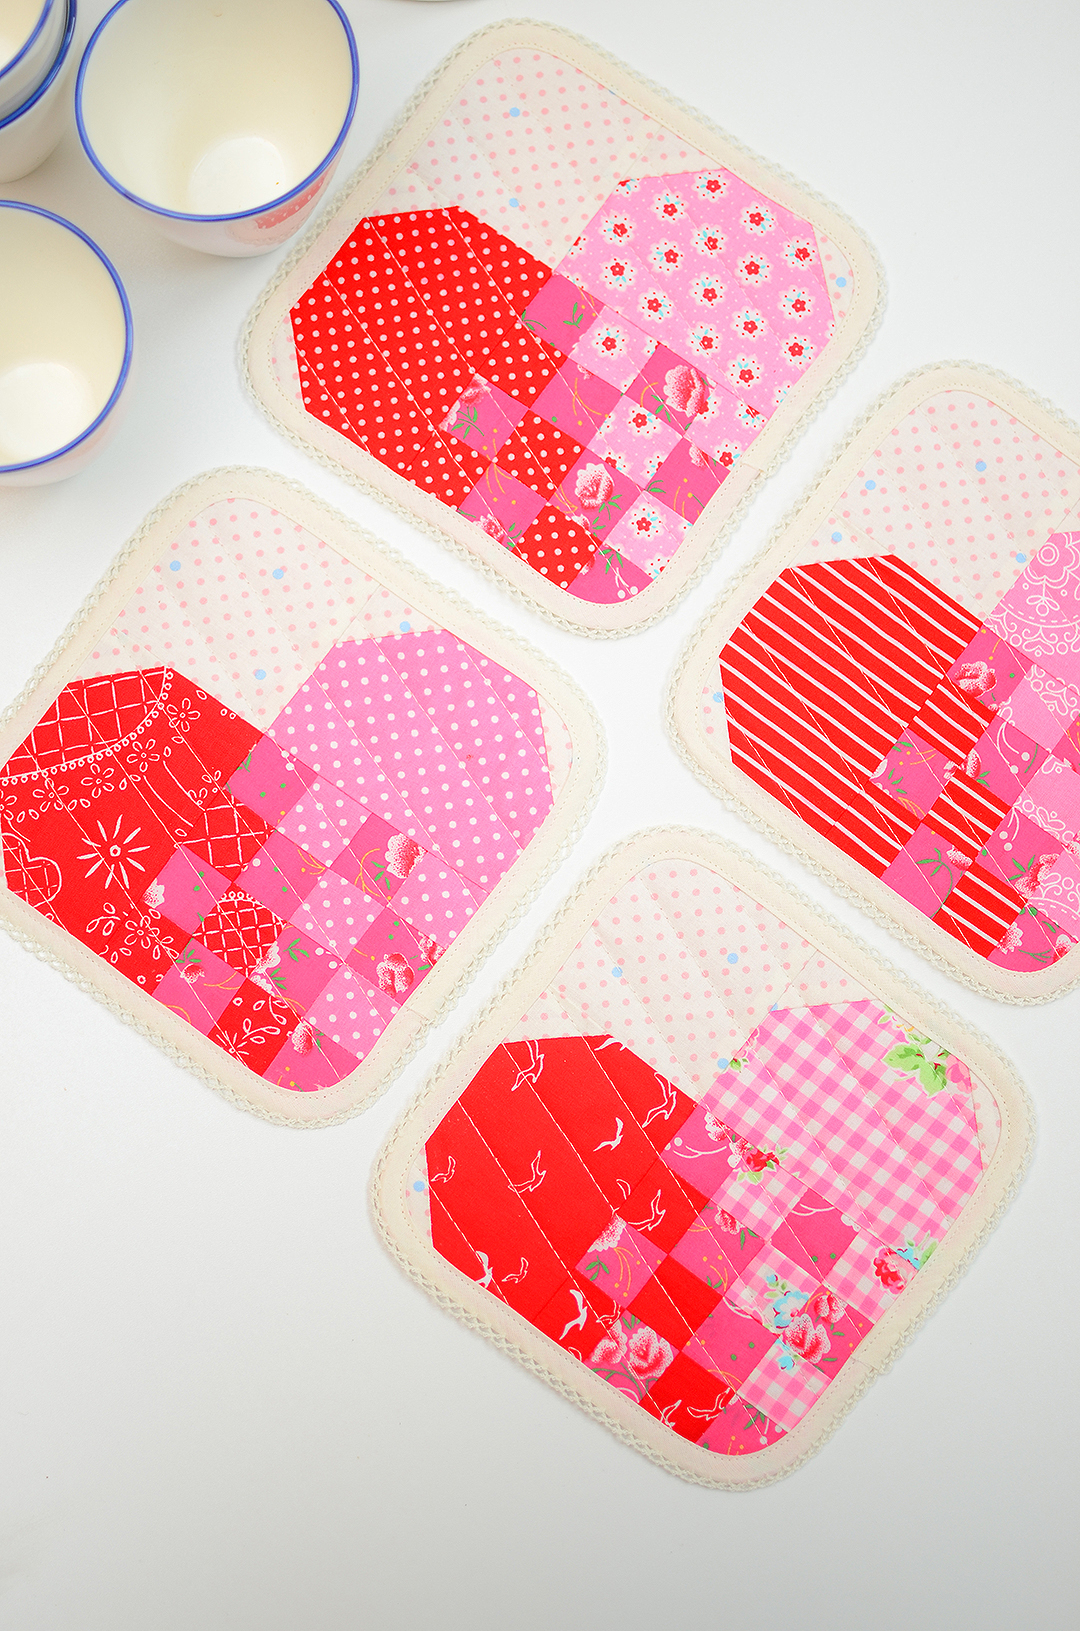 Checkered Heart Quilted Coasters Tutorial - a heart quilt pattern by ellis & higgs